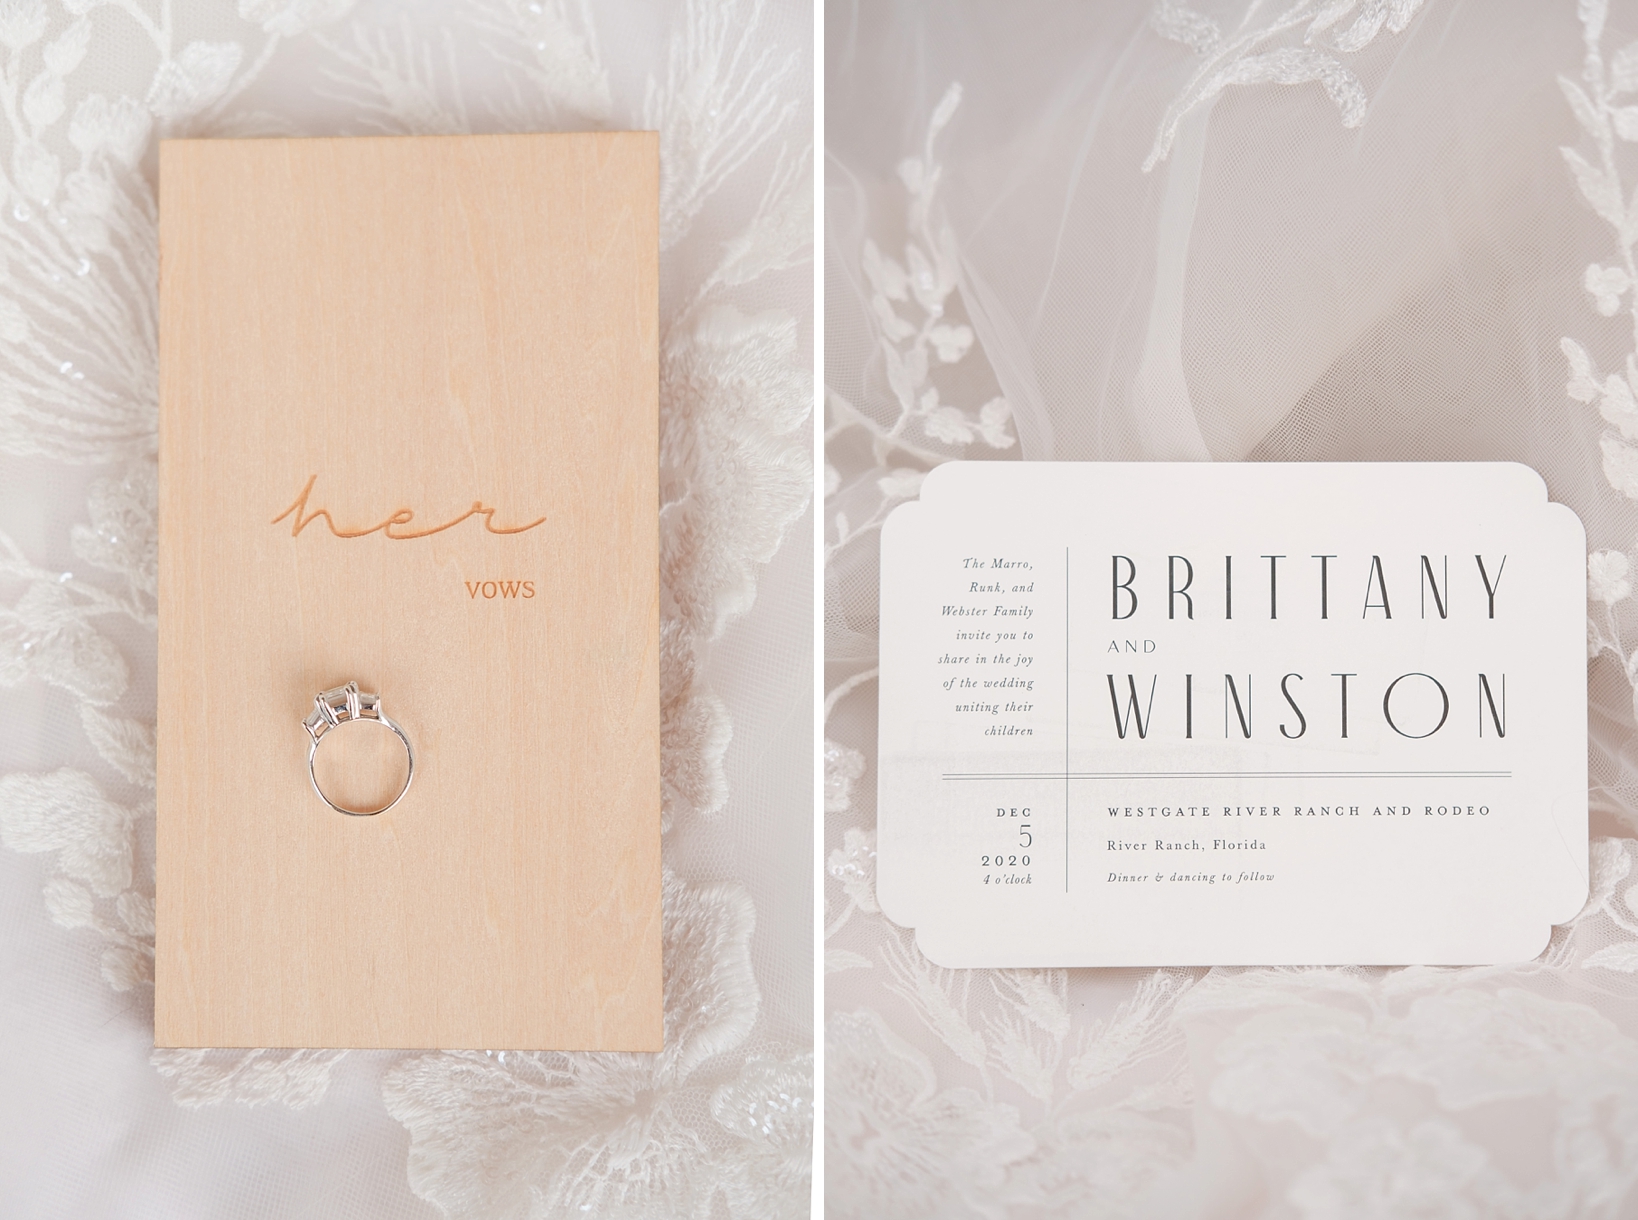 A wedding invitation to a Westgate River Ranch wedding and a bride's vow book with her engagement ring